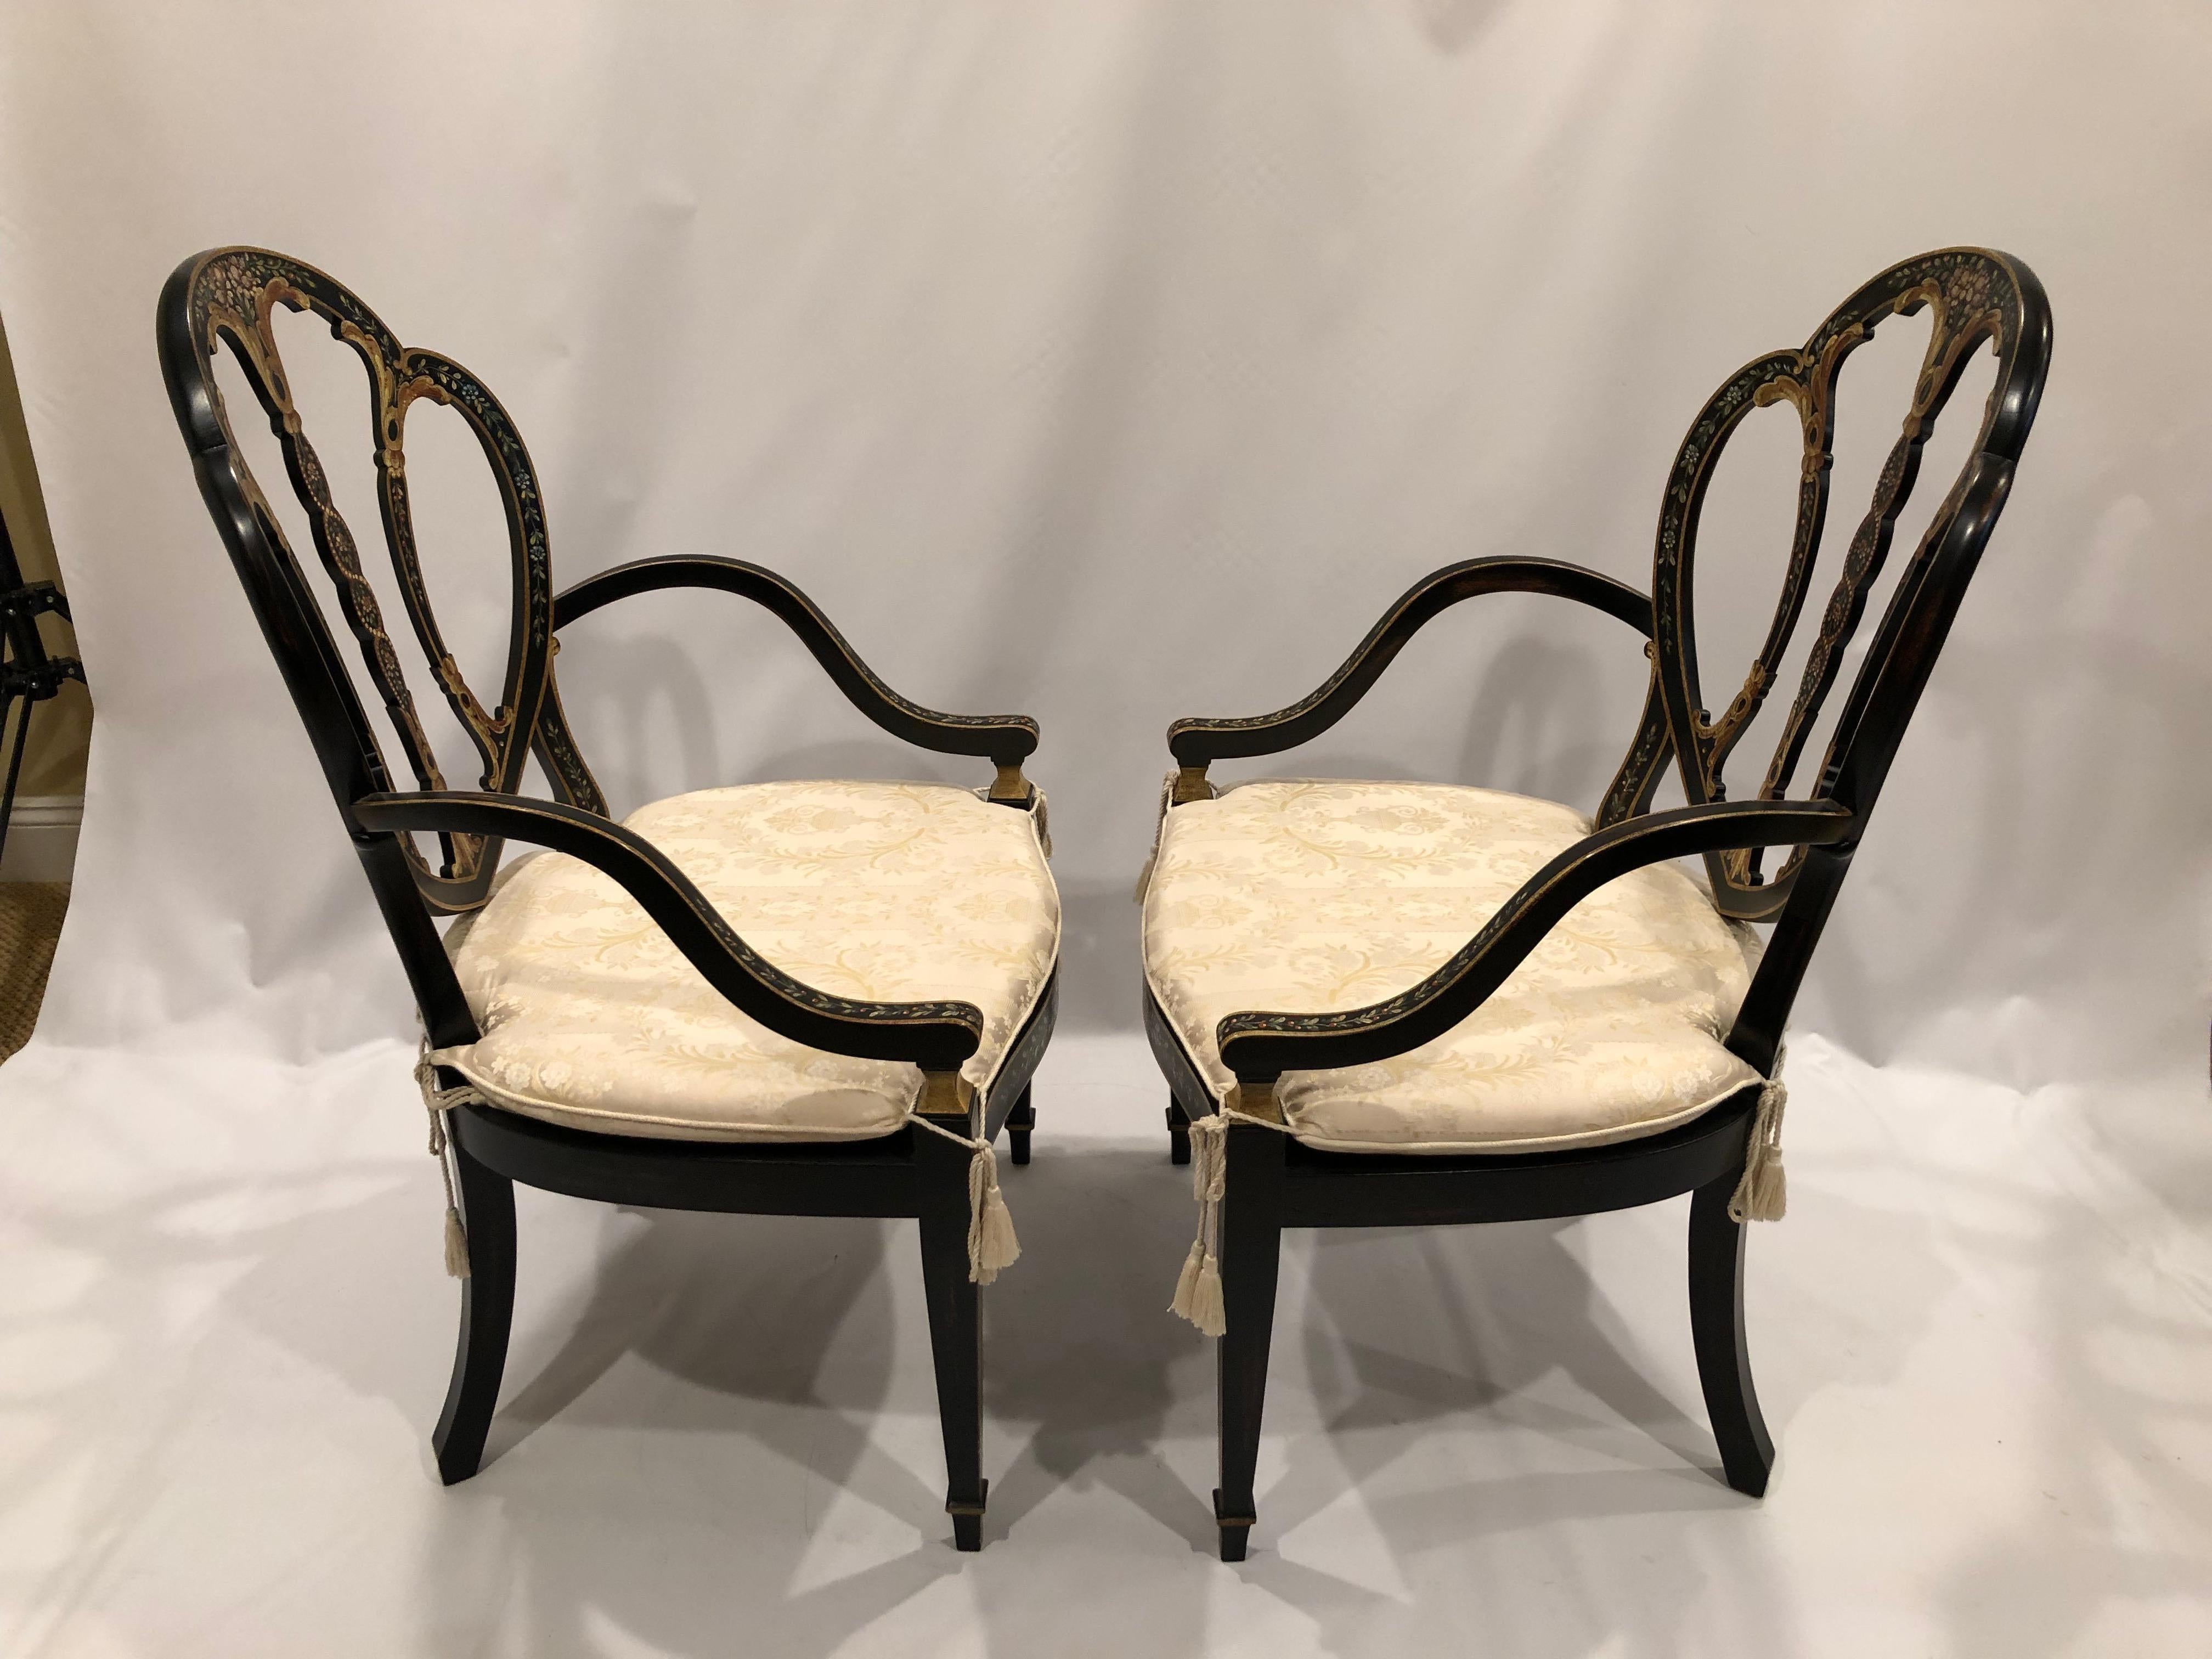 Superb Pair of Adam Style Handpainted Armchairs with Caned Seats For Sale 3